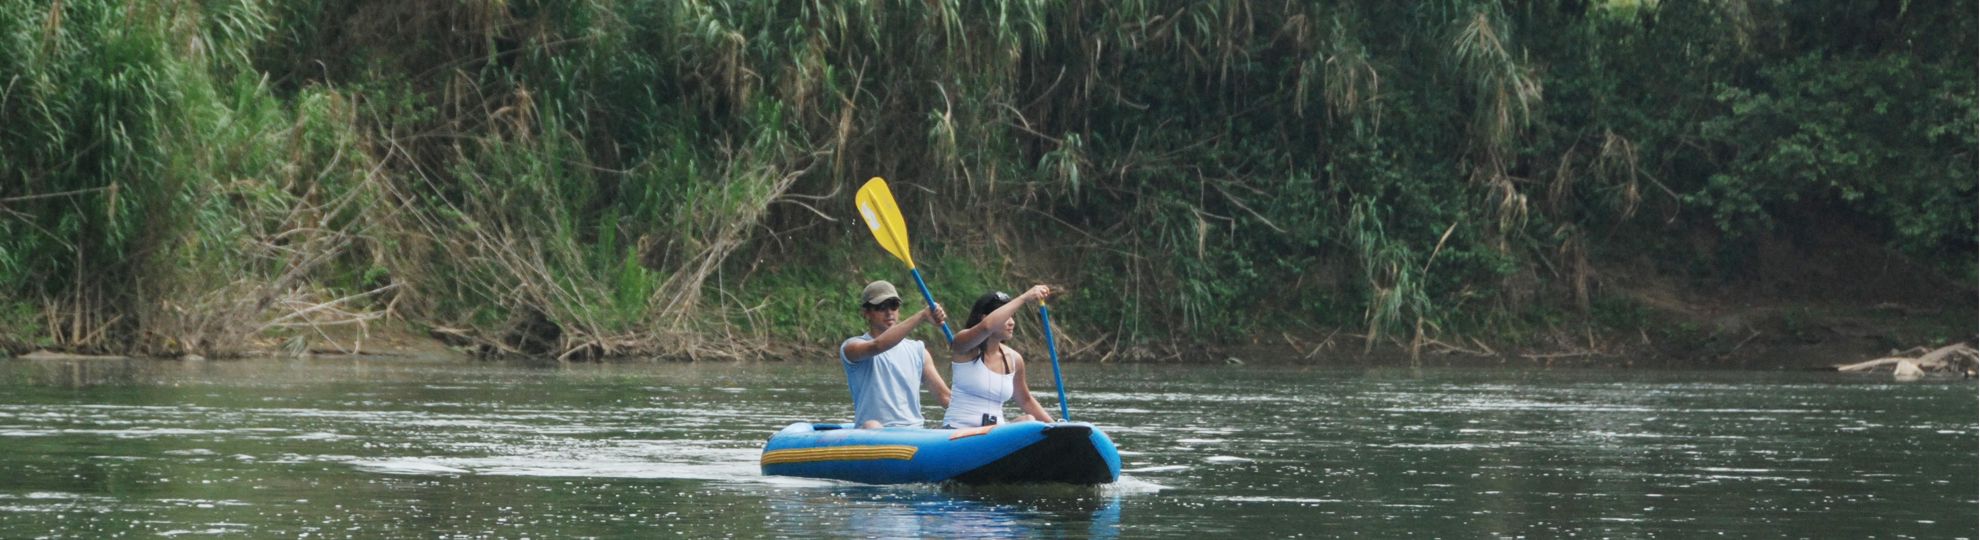 Serendipity Adventures Costa Rica guests paddling a river